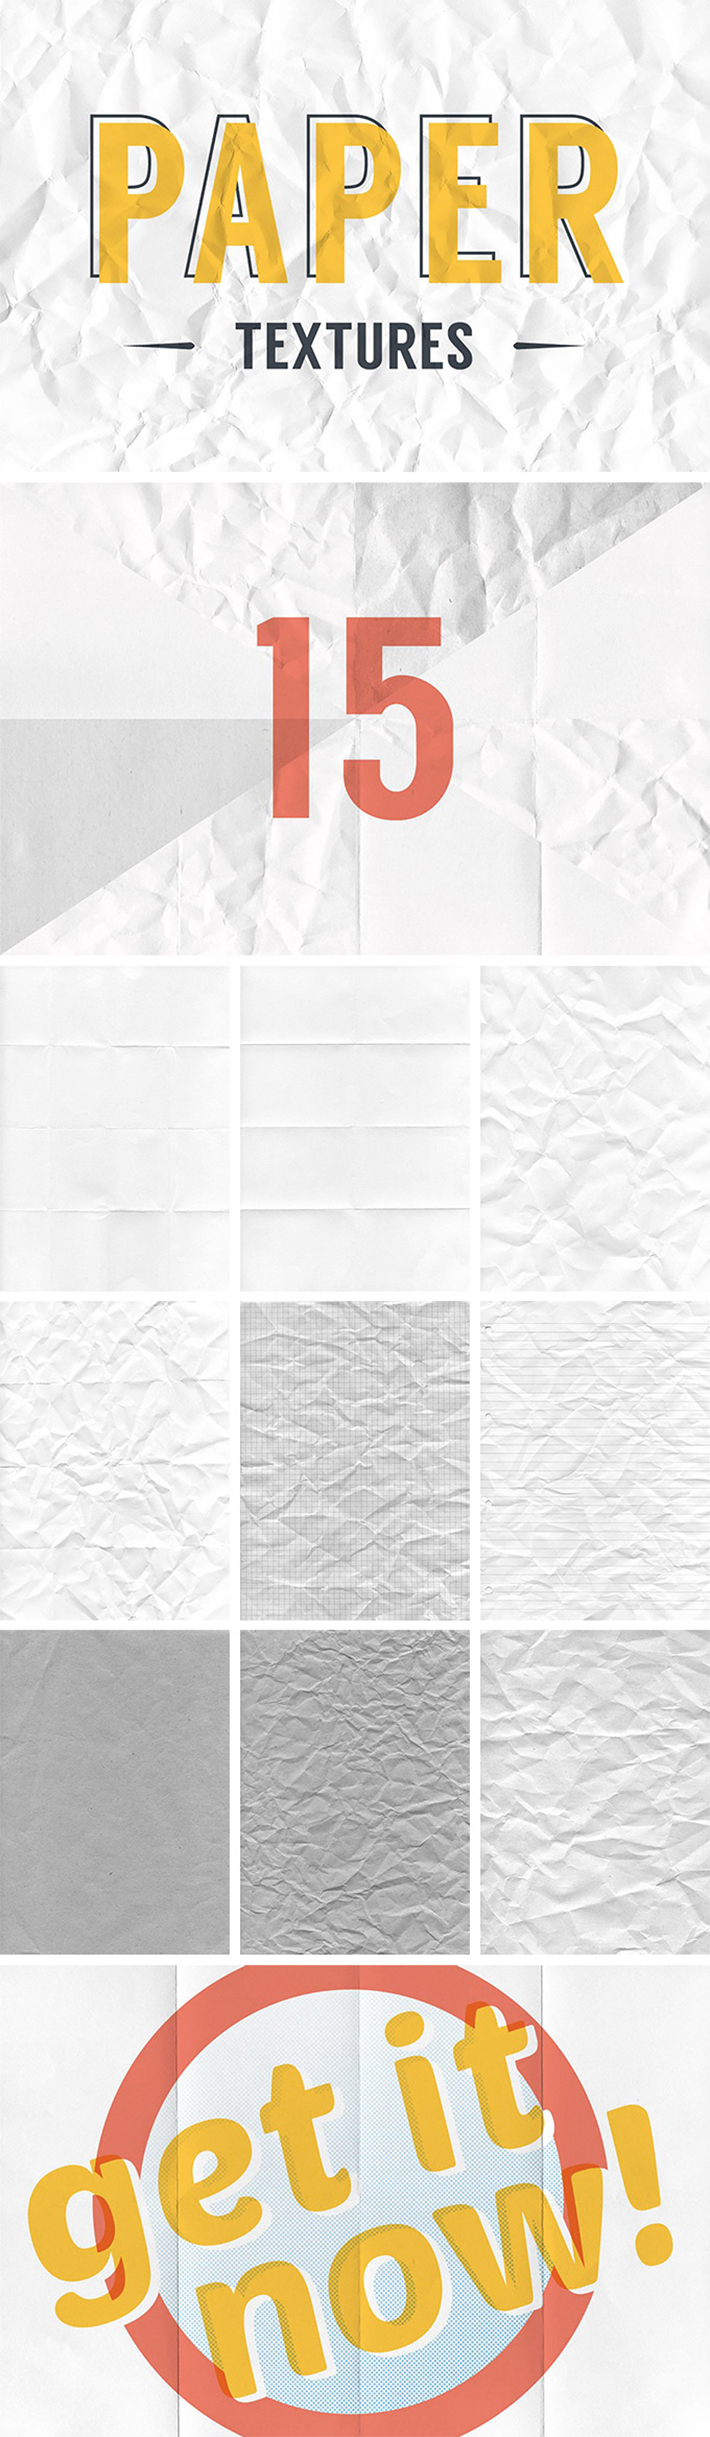 Awesome Paper Textures